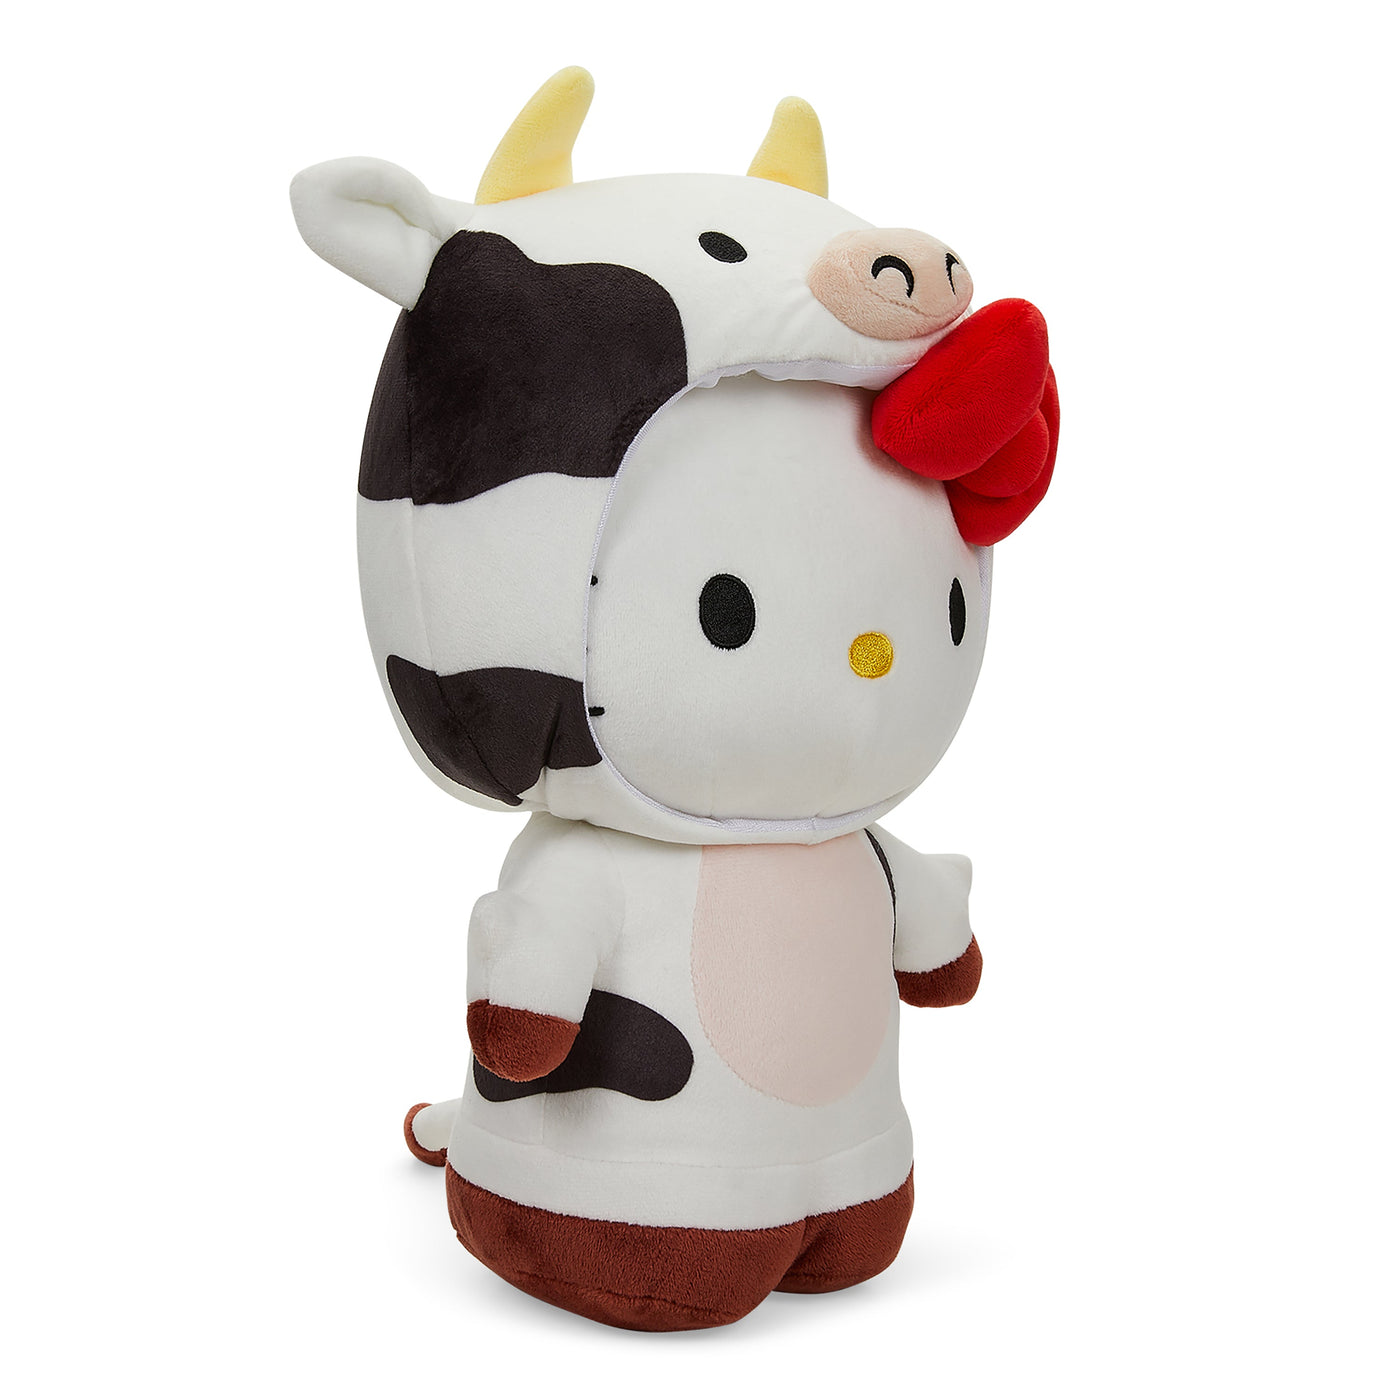 HELLO KITTY YEAR OF THE OX 13 INCH INTERACTIVE PLUSH